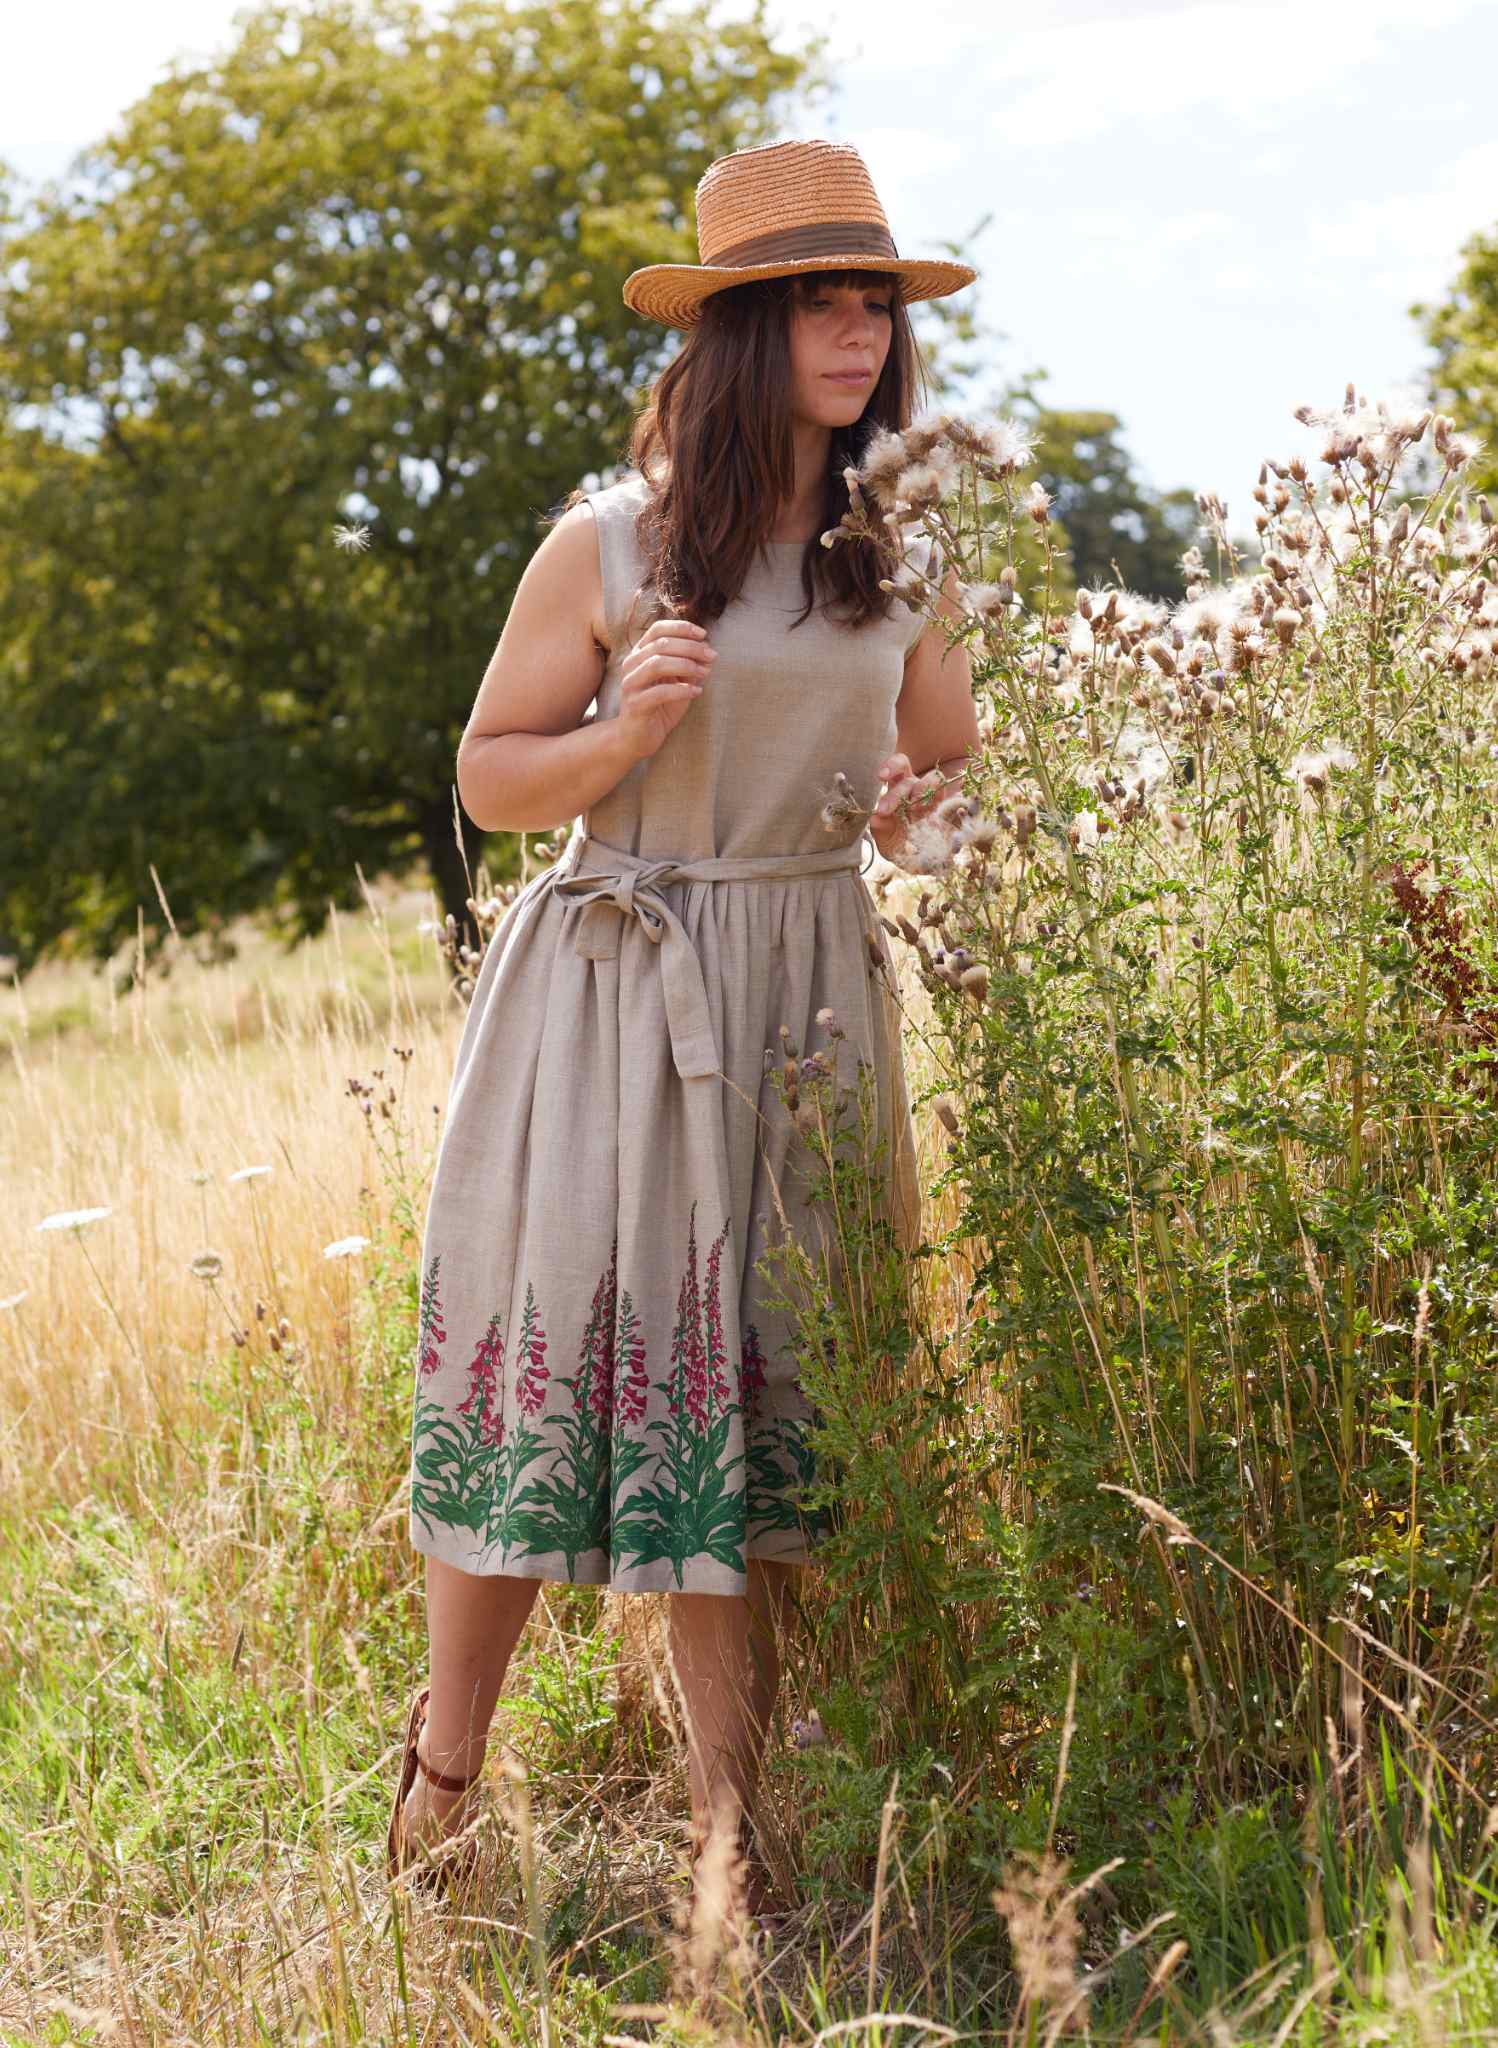 Woman in a wildflower meadow wearing a linen dress with foxgloves in its print